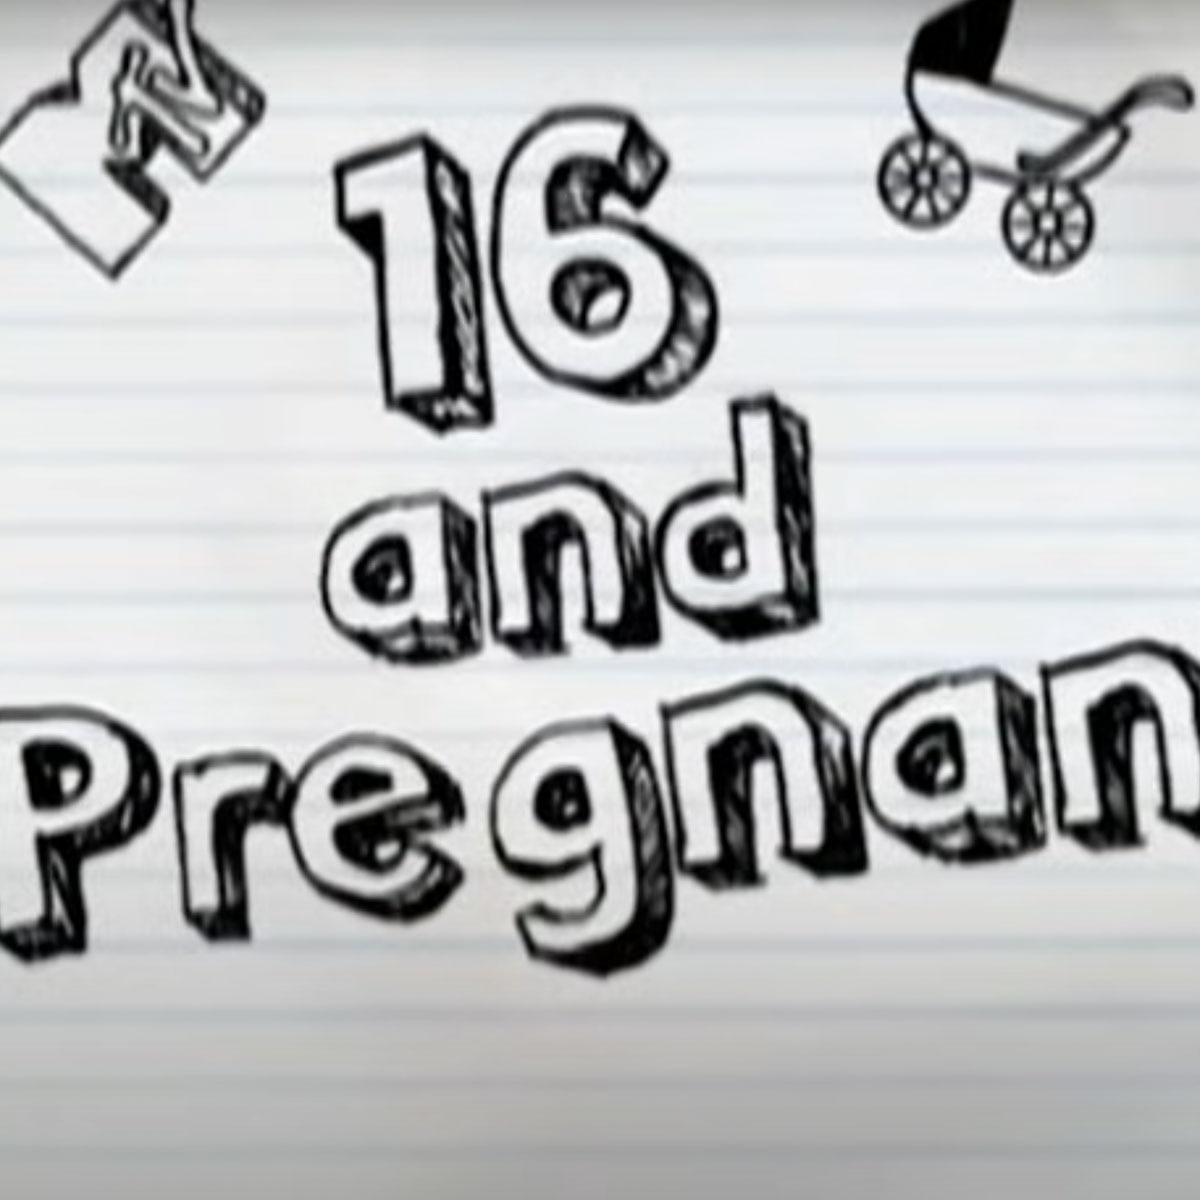 16 and Pregnant